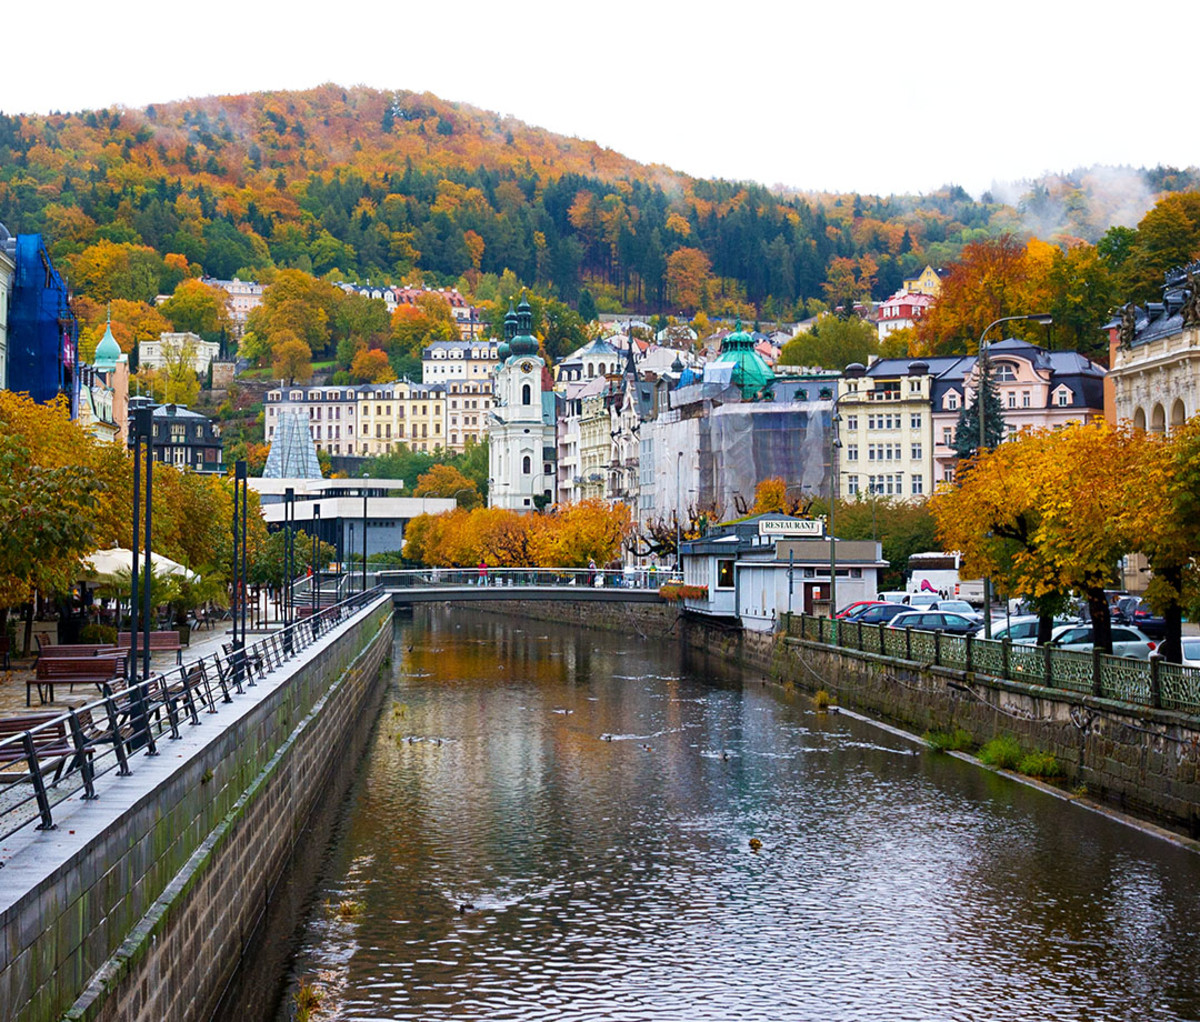 In Karlovy Vary, the embankment of the Tepla river in autumn